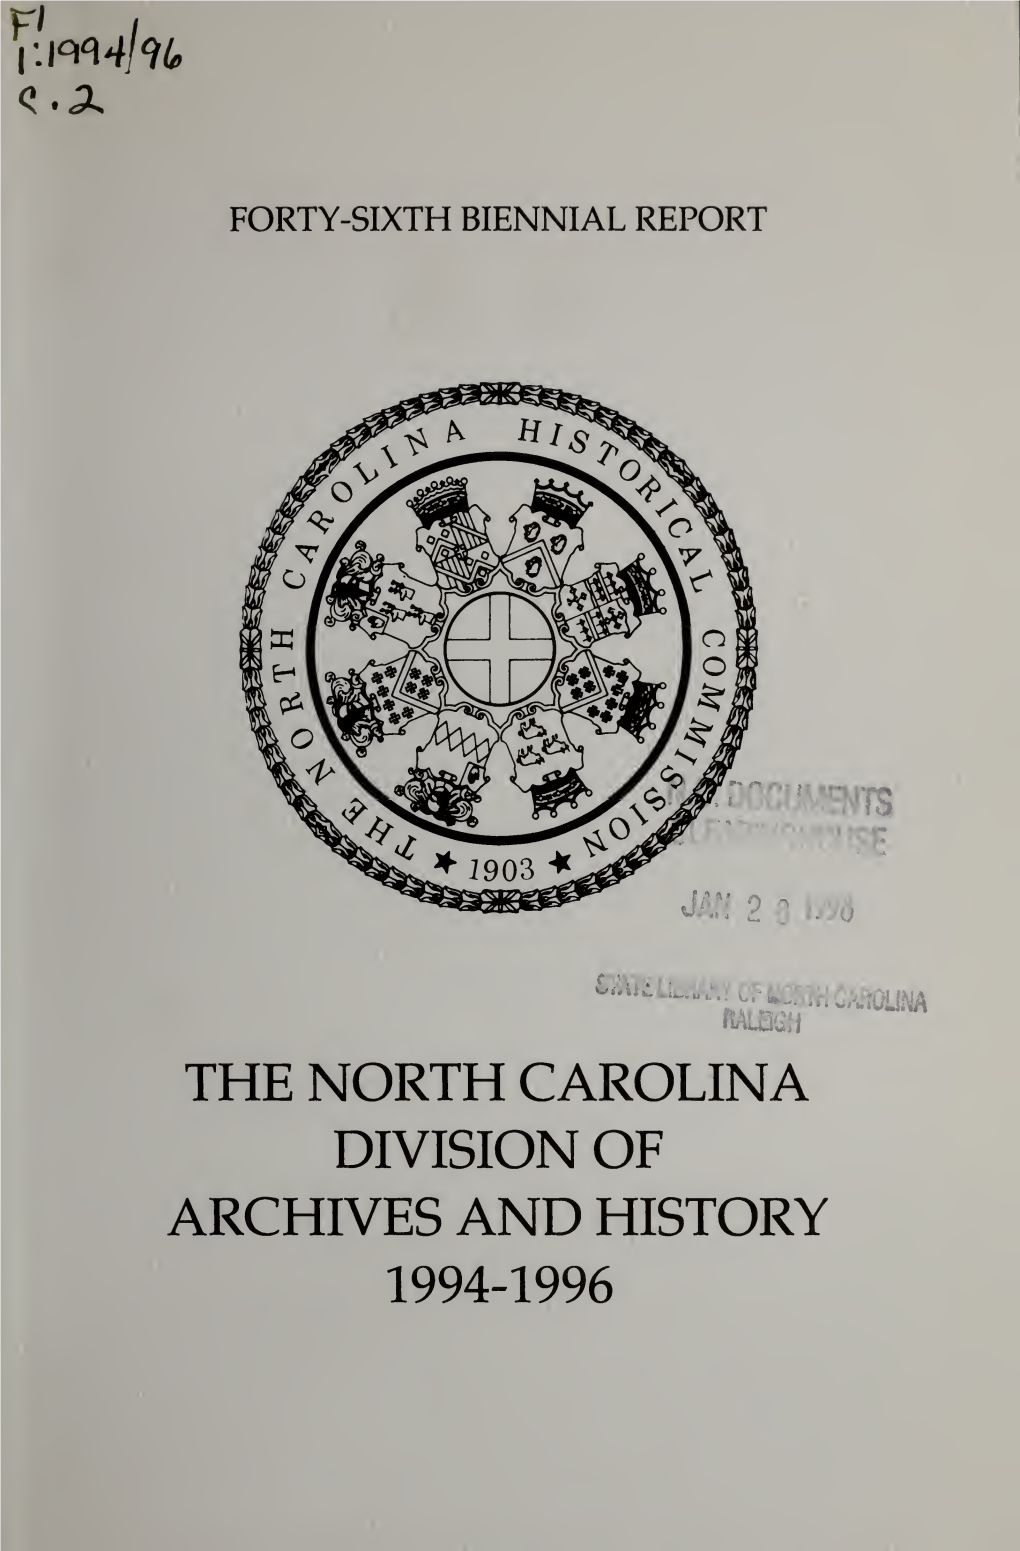 Biennial Report of the North Carolina Division of Archives and History